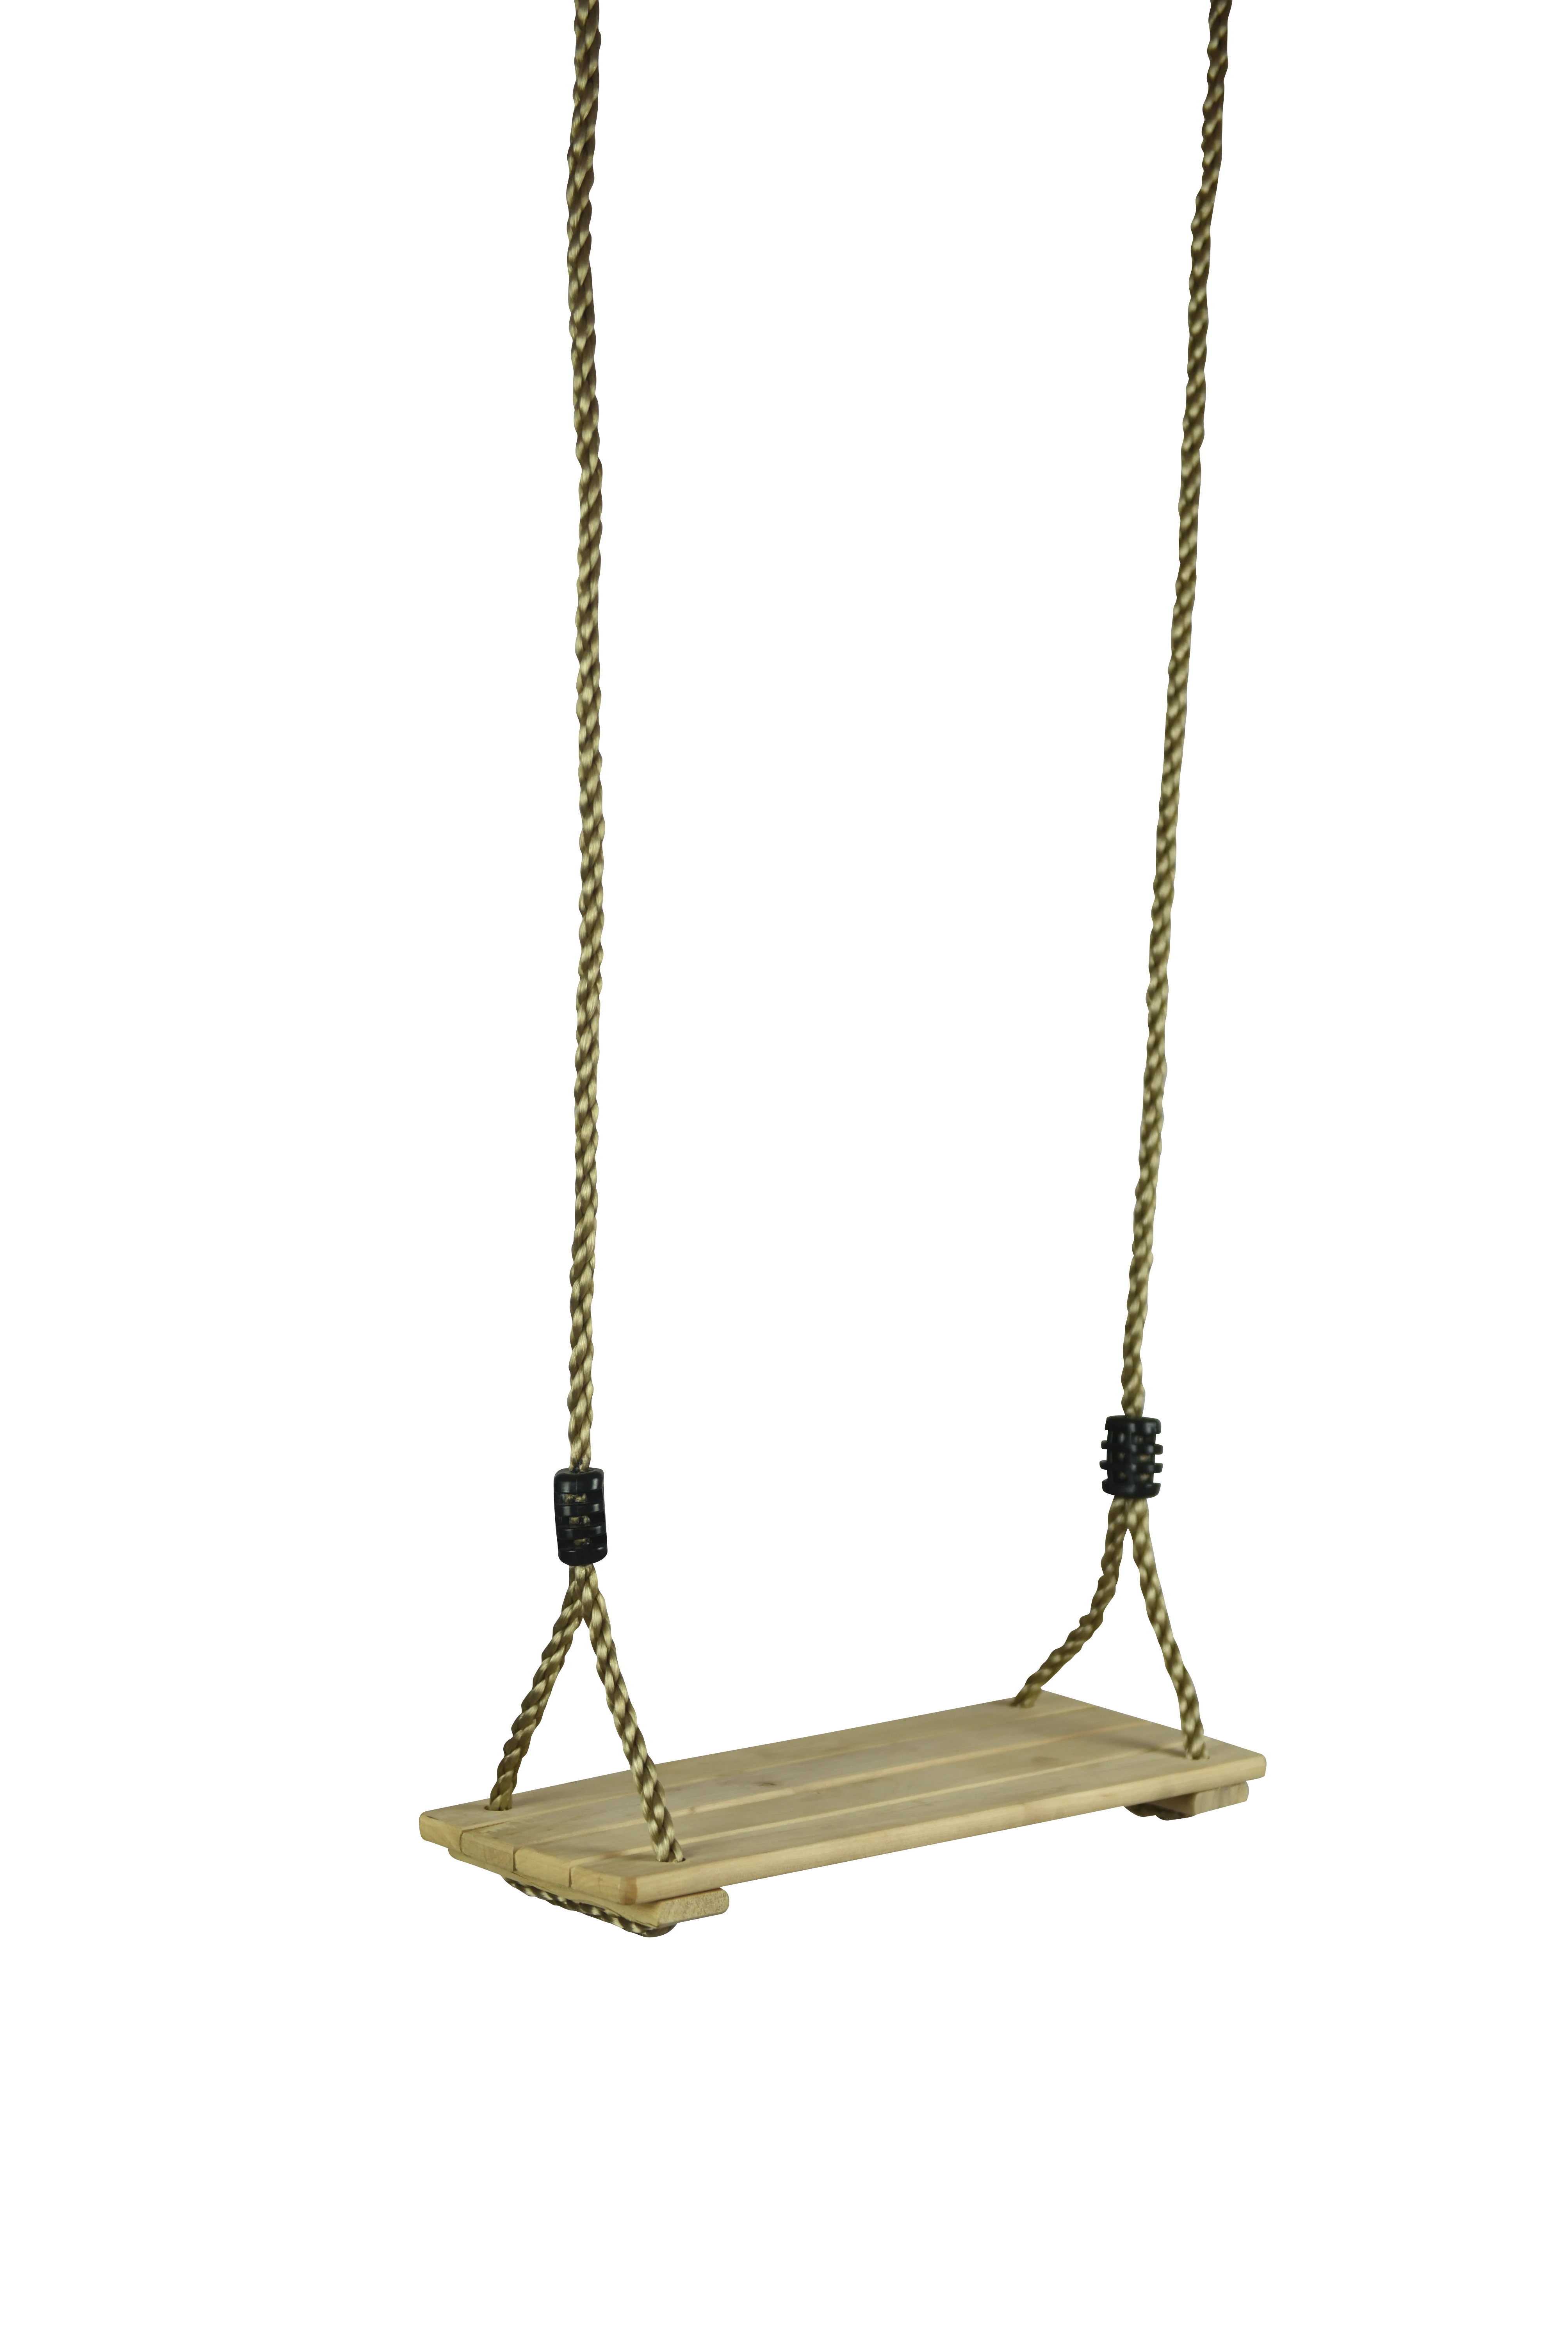 Green environmental quality swing  wooden seat swing  toy swing products